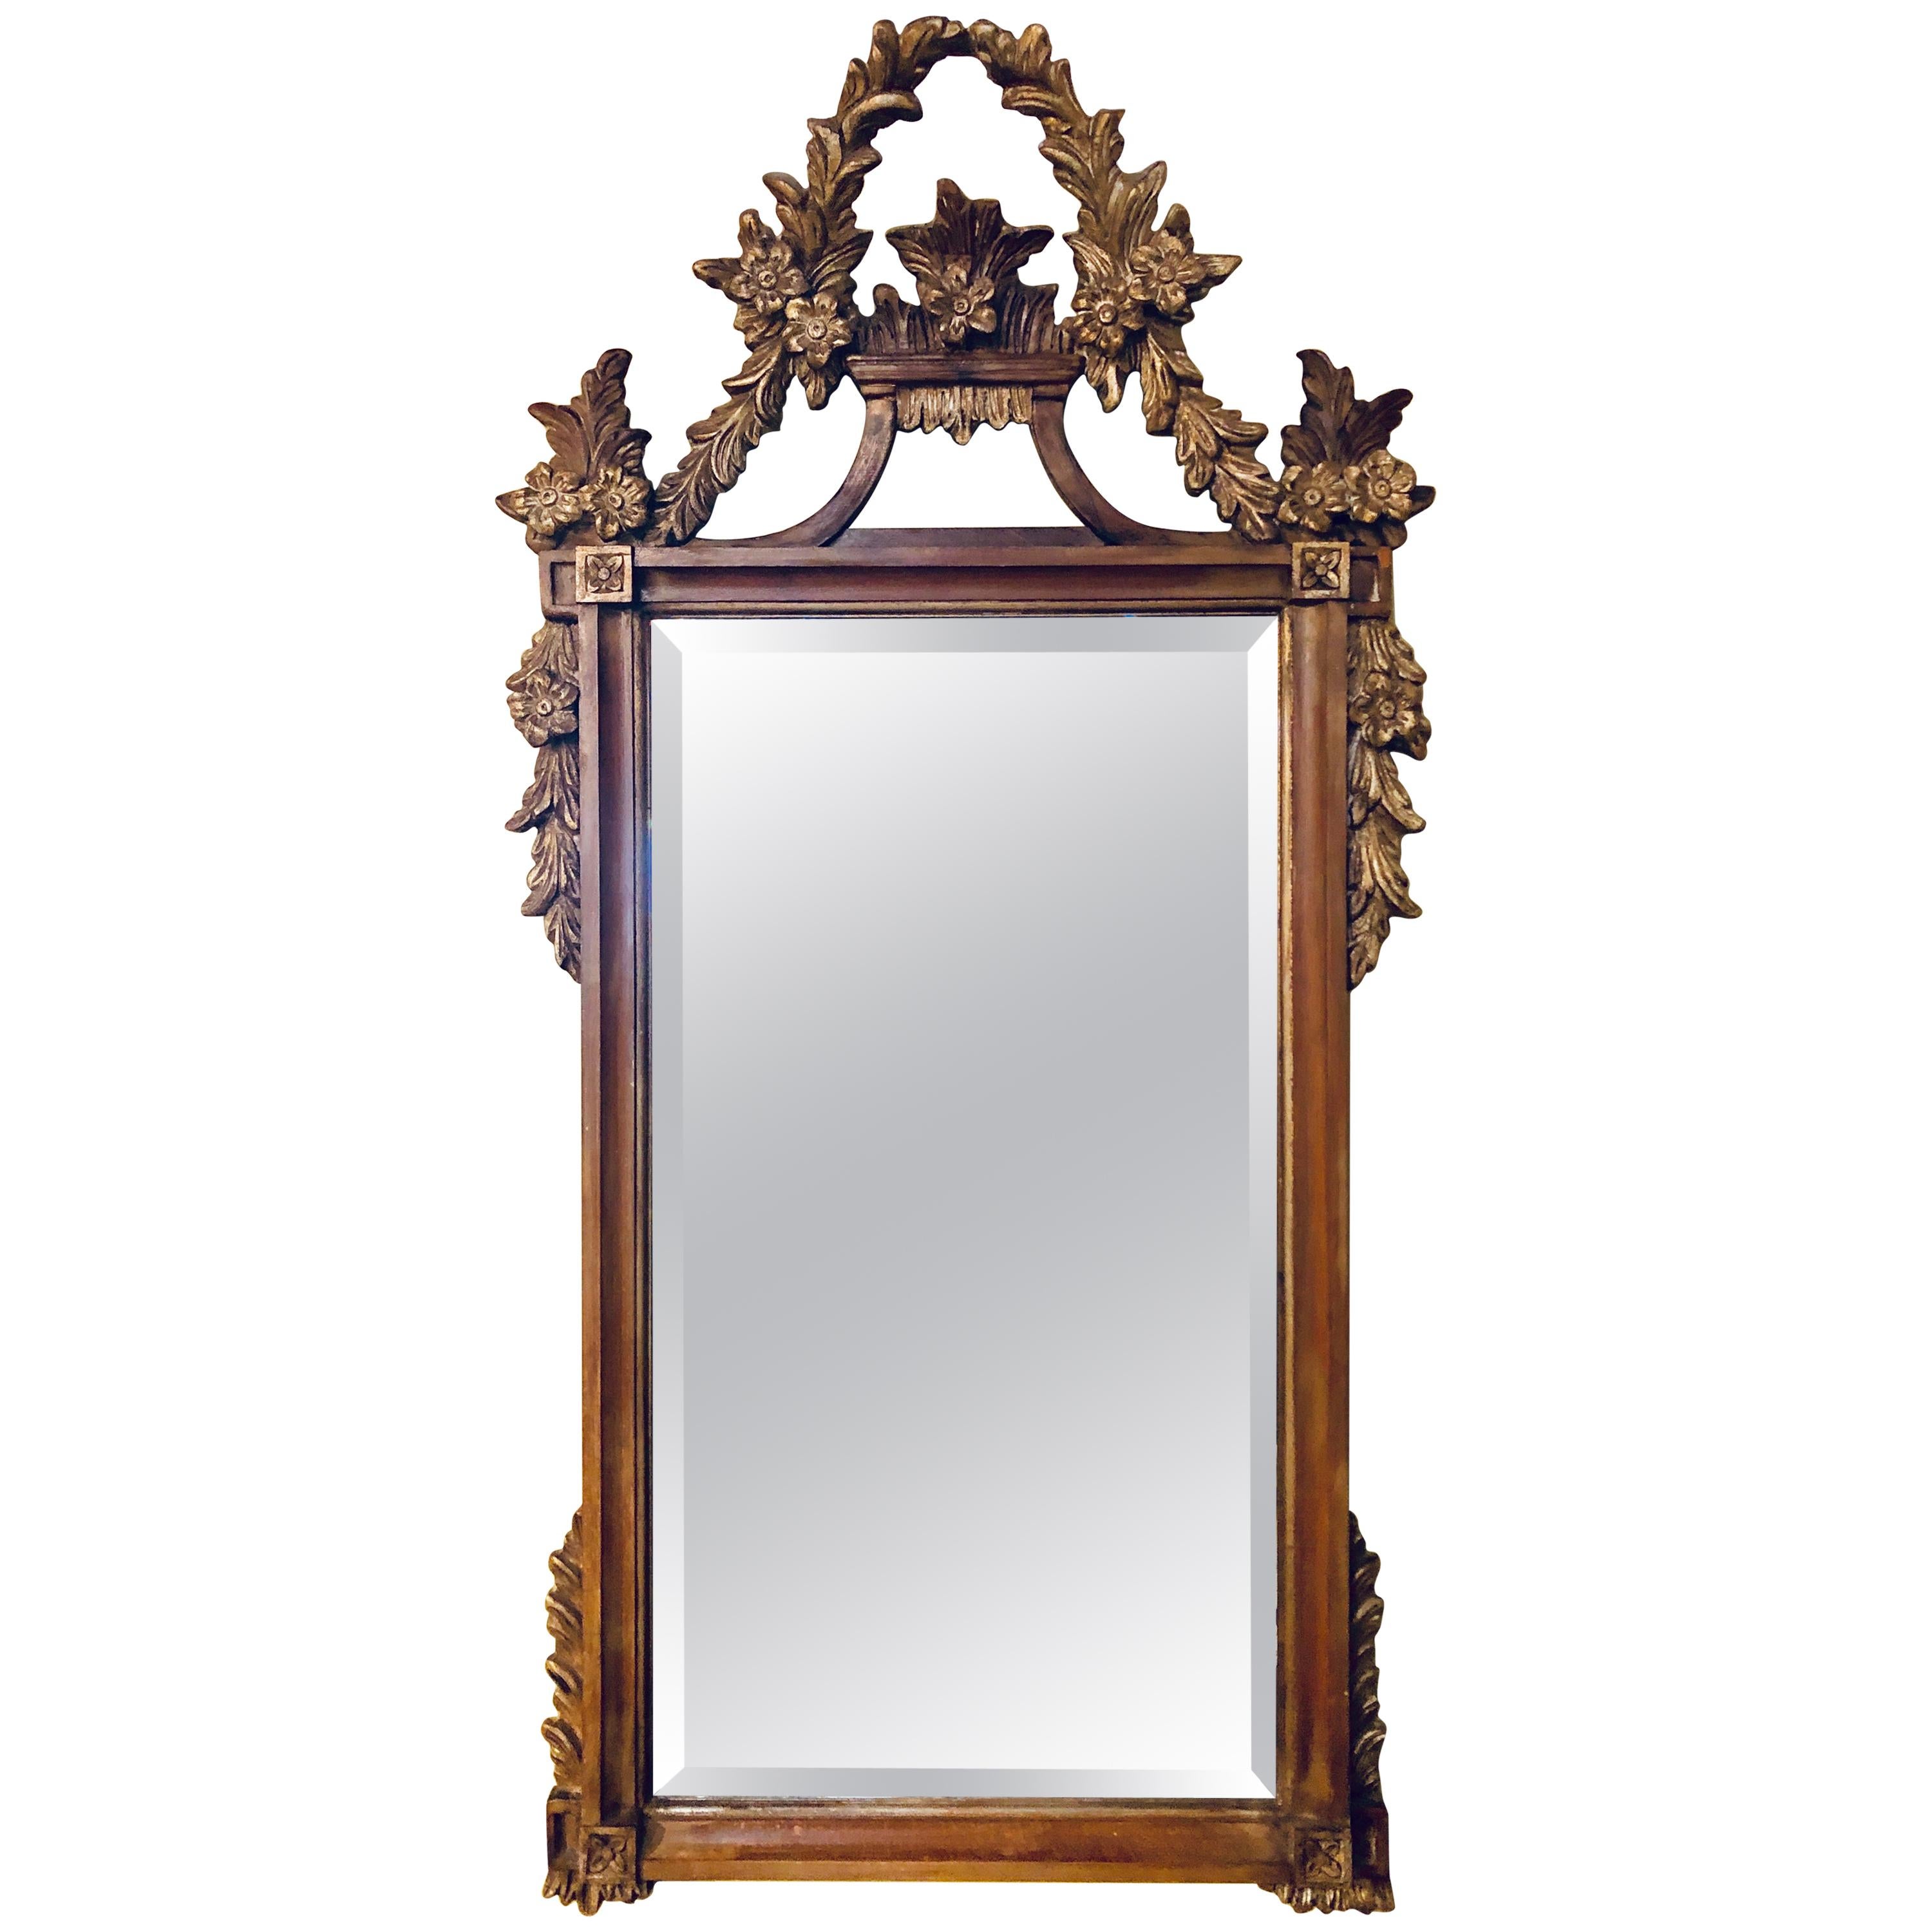 A Gilt Gold Italian Acanthus Leaf Carved Wall or Console Mirror For Sale